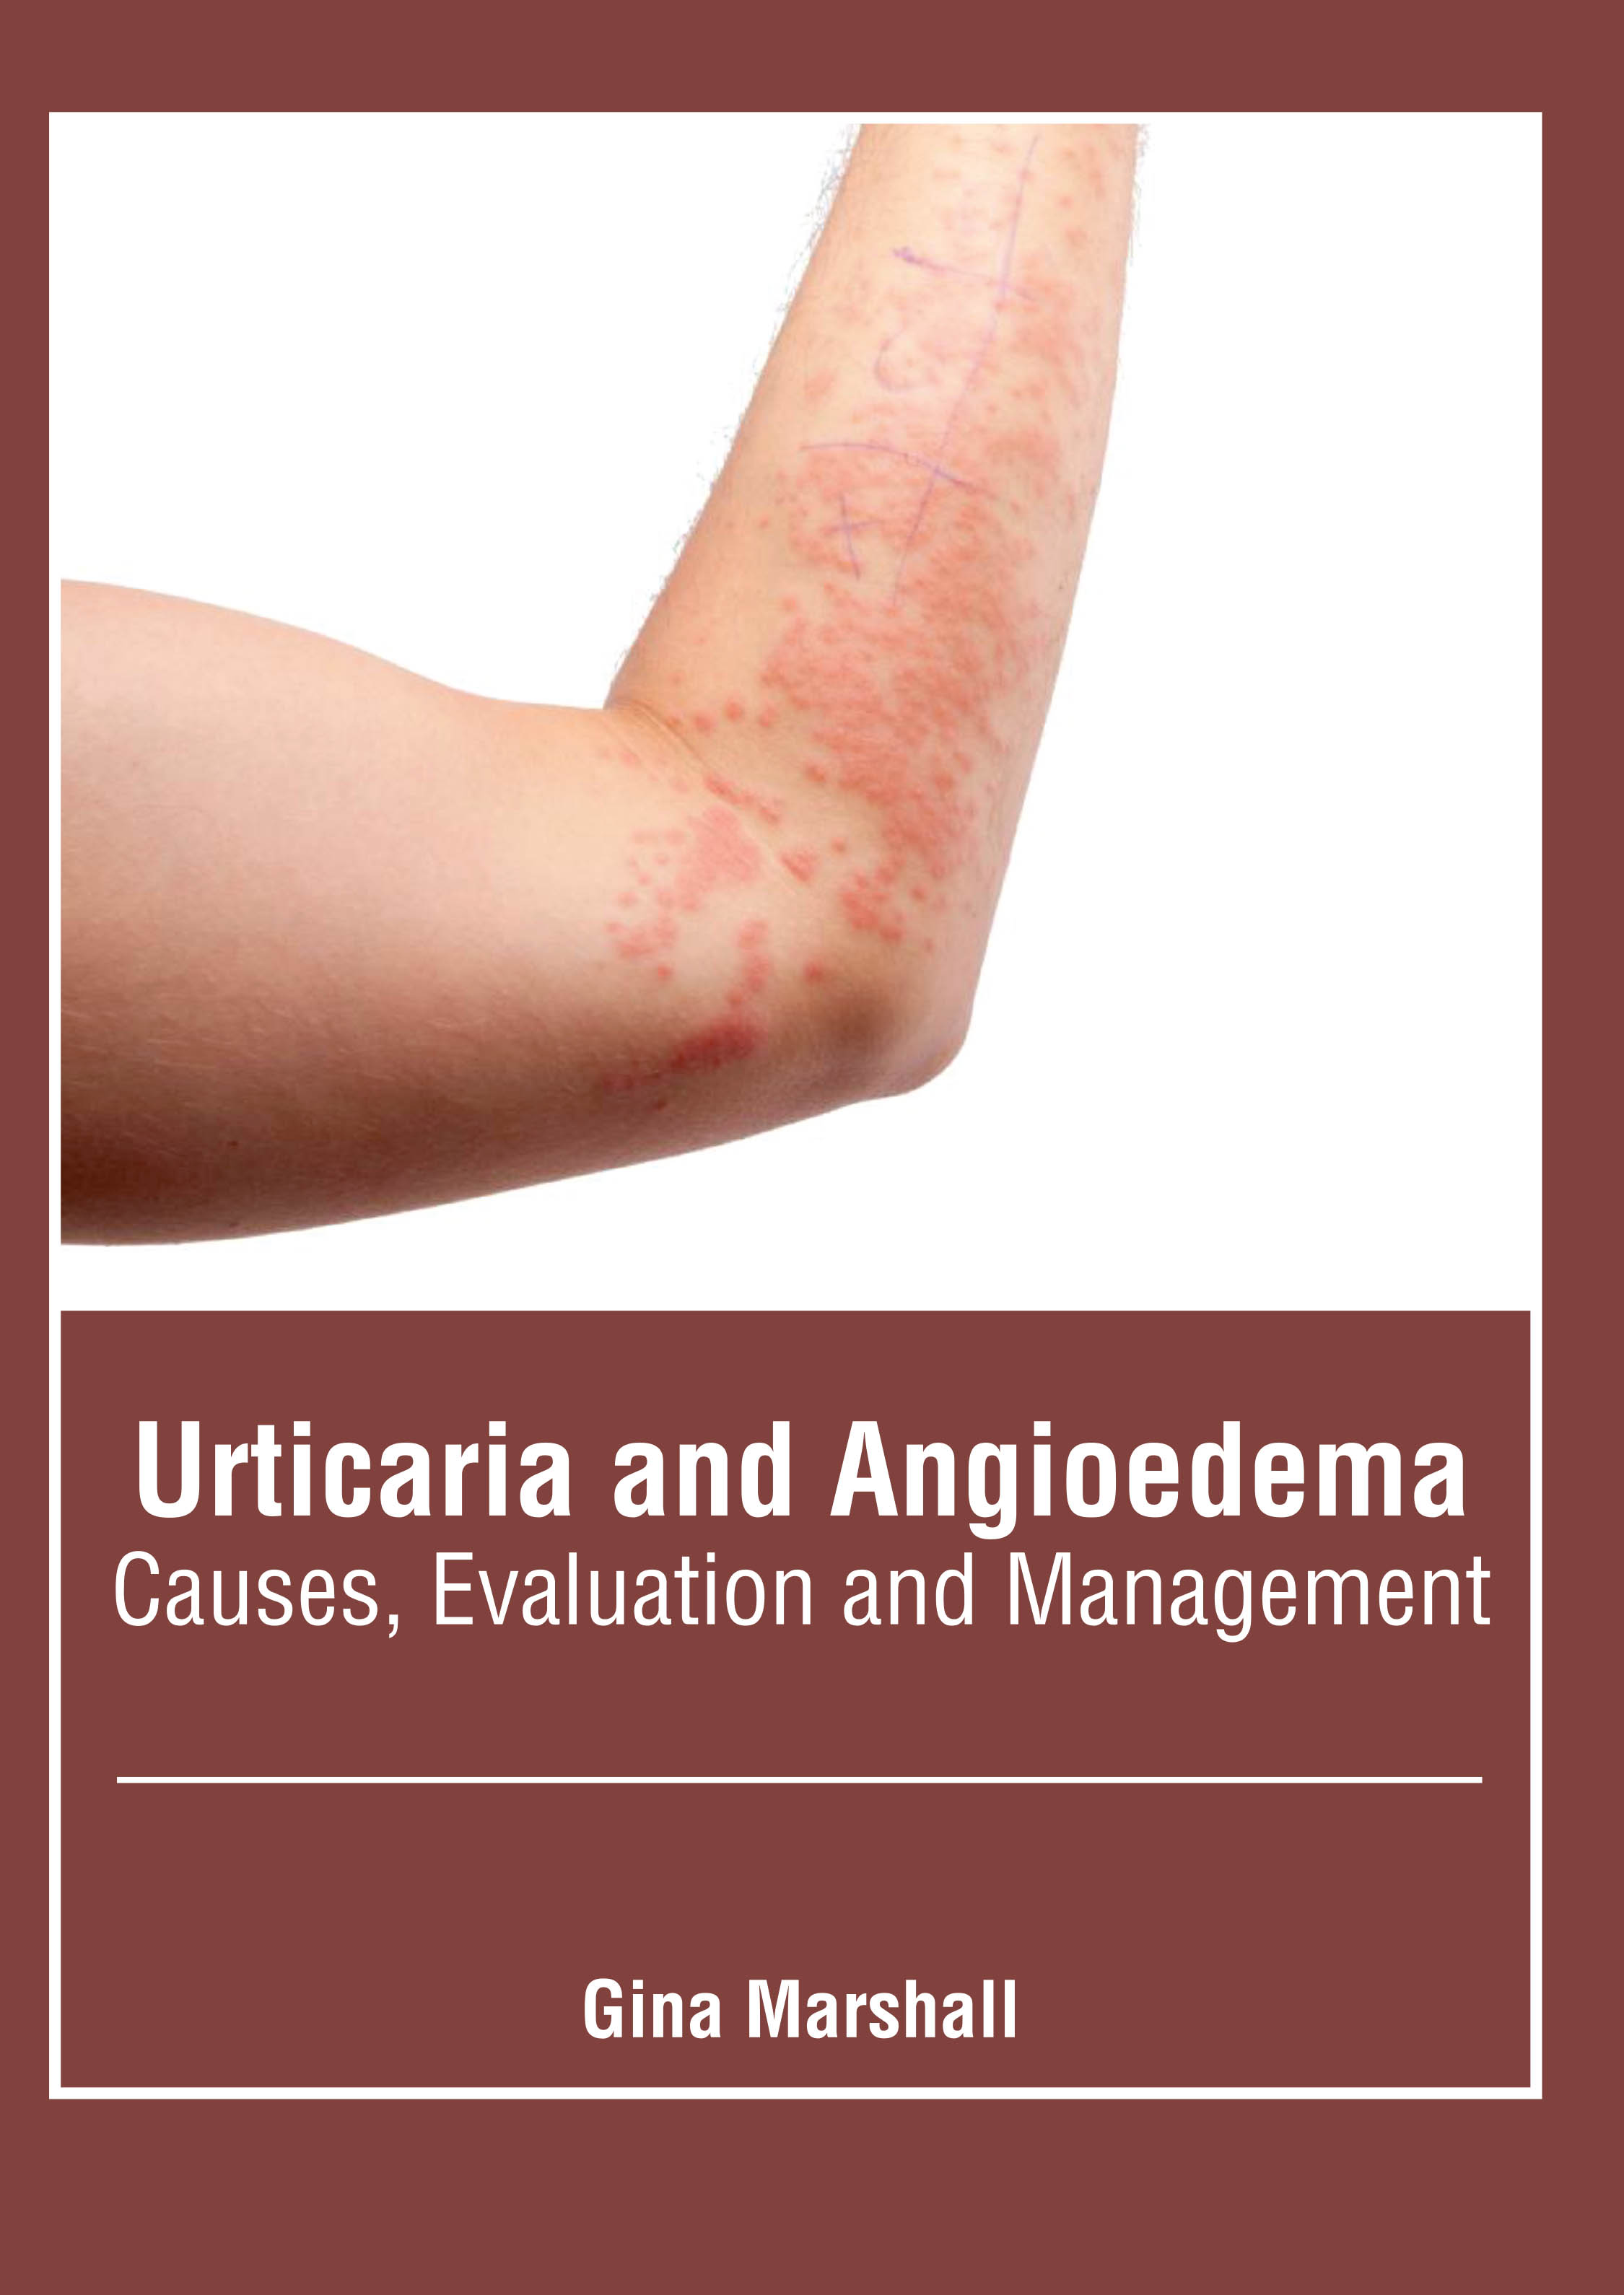 

exclusive-publishers/american-medical-publishers/urticaria-and-angioedema-causes-evaluation-and-management-9781639270675